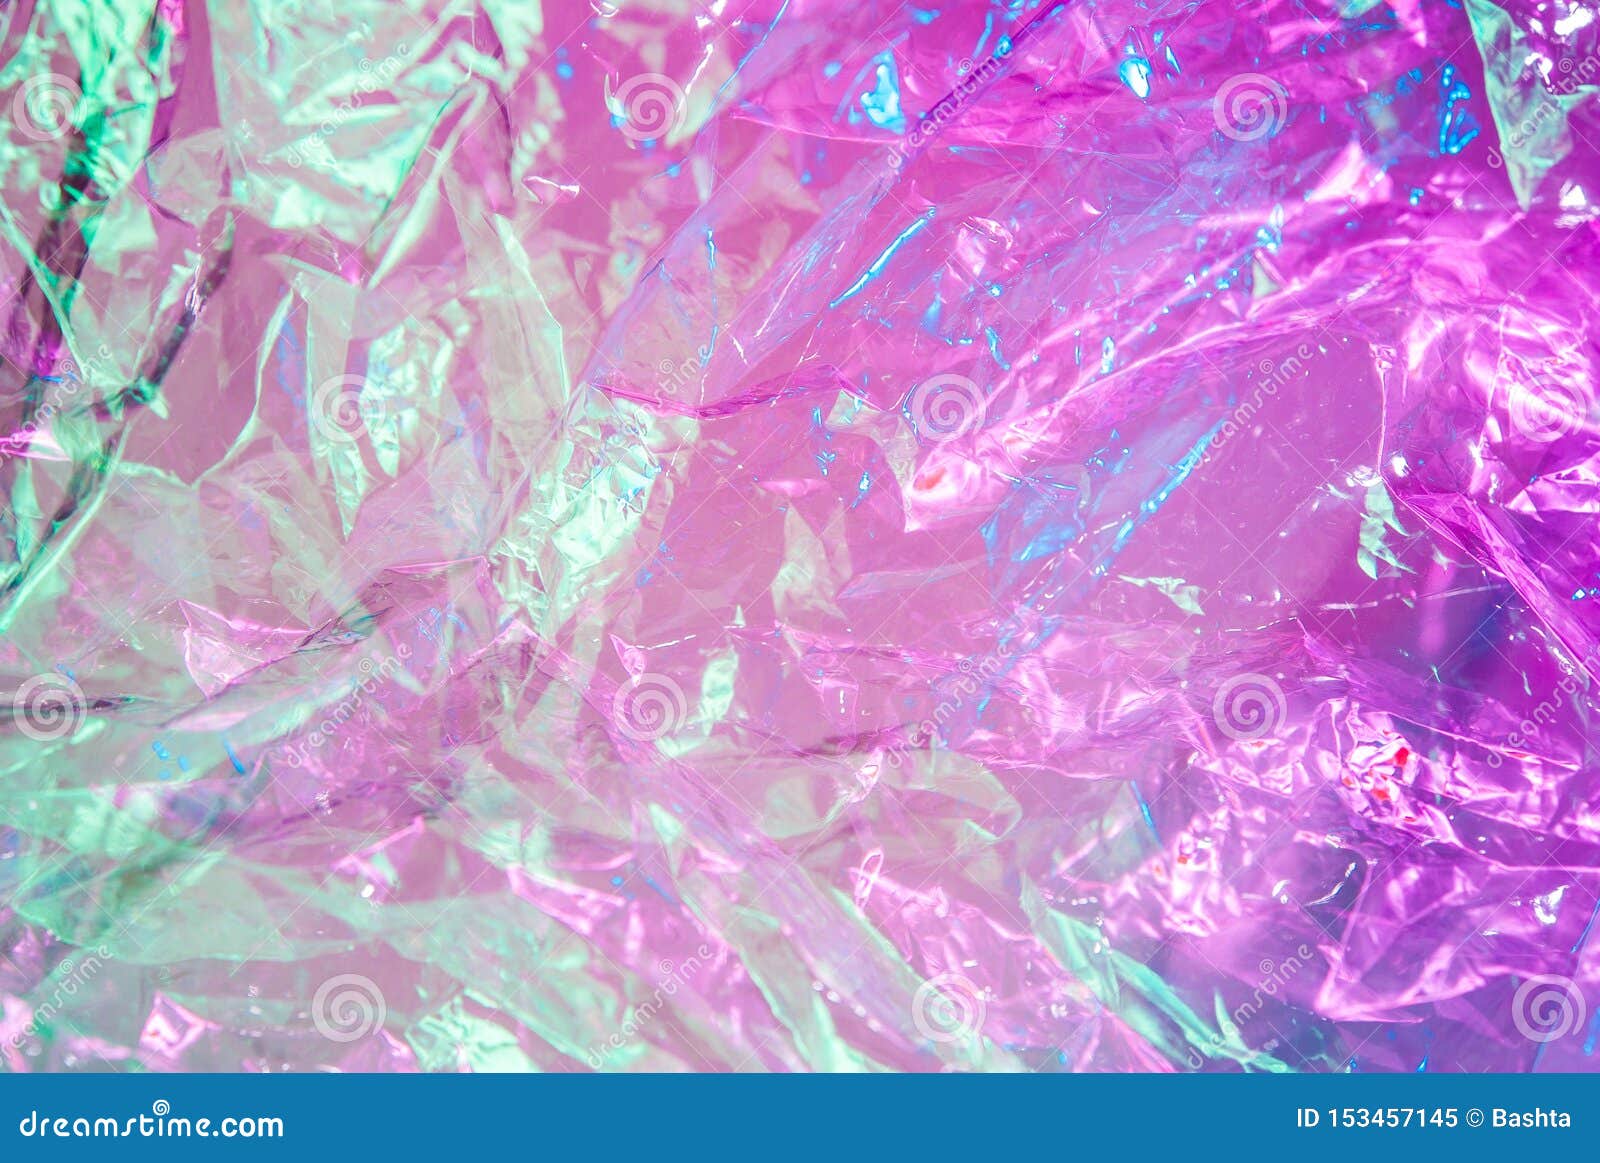 holographic background in the style of the 80-90s. real texture of cellophane film in bright acid colors.